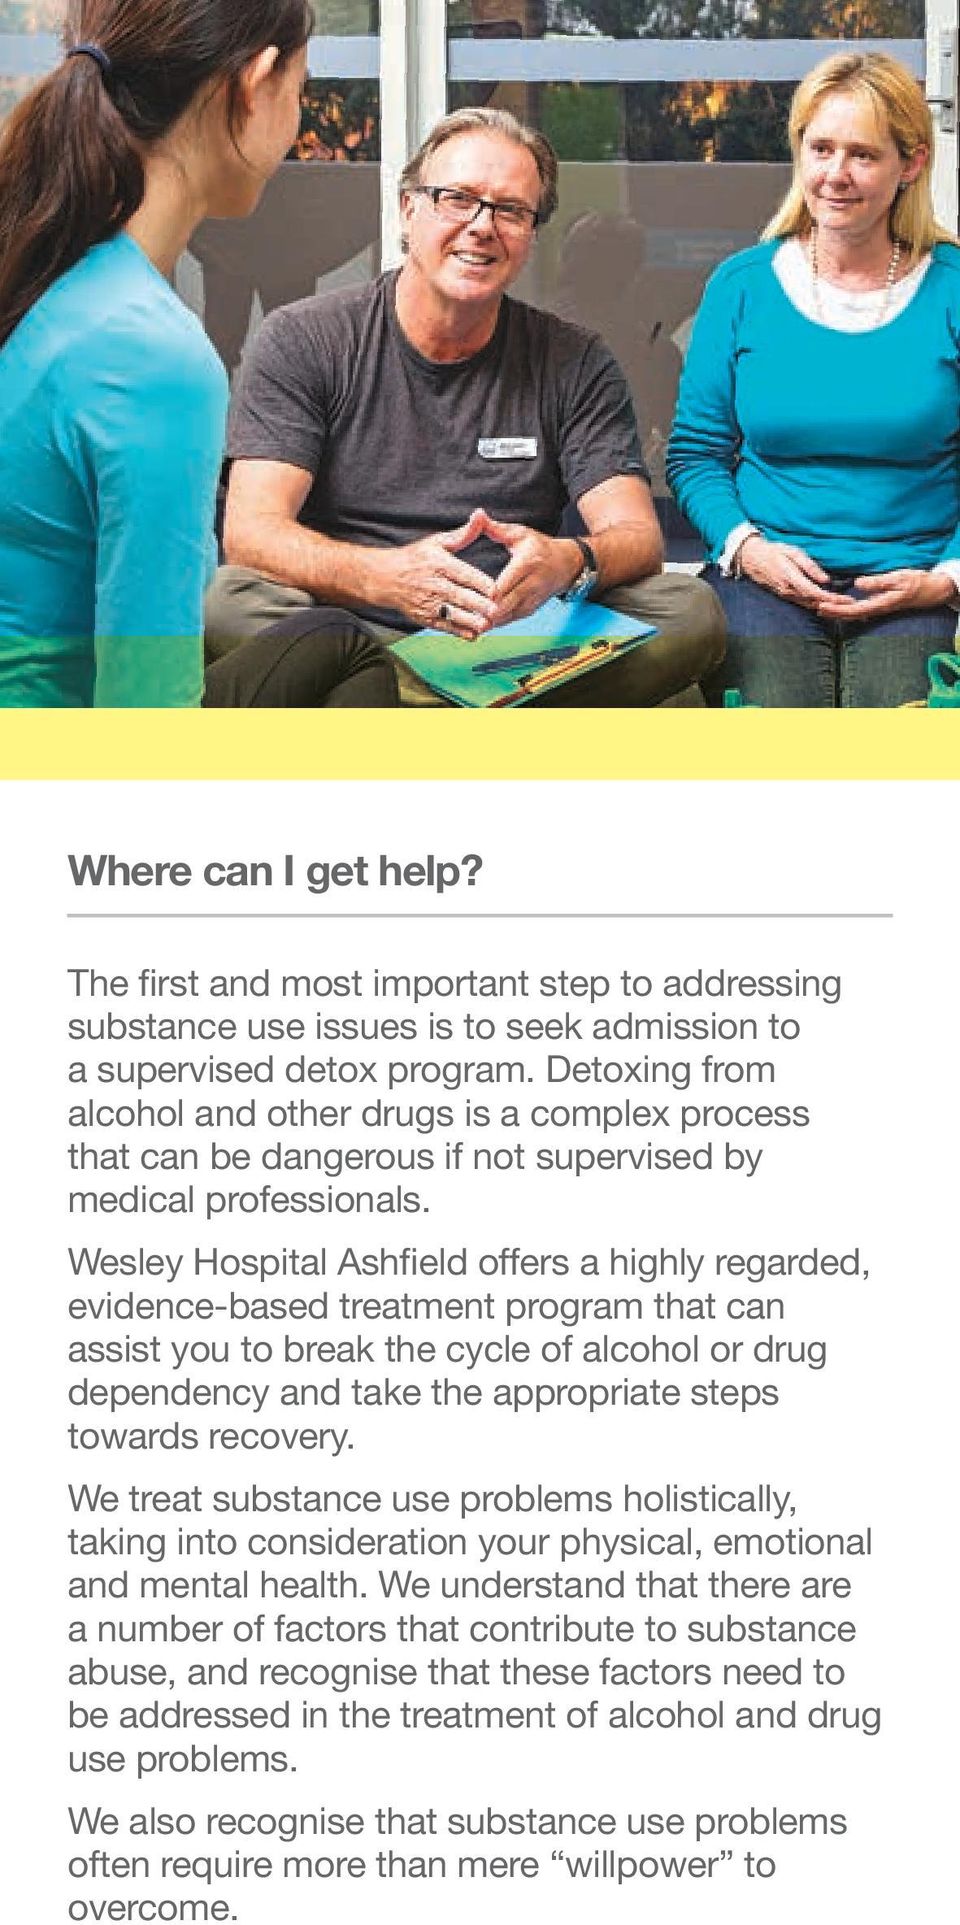 Wesley Hospital Ashfield offers a highly regarded, evidence-based treatment program that can assist you to break the cycle of alcohol or drug dependency and take the appropriate steps towards